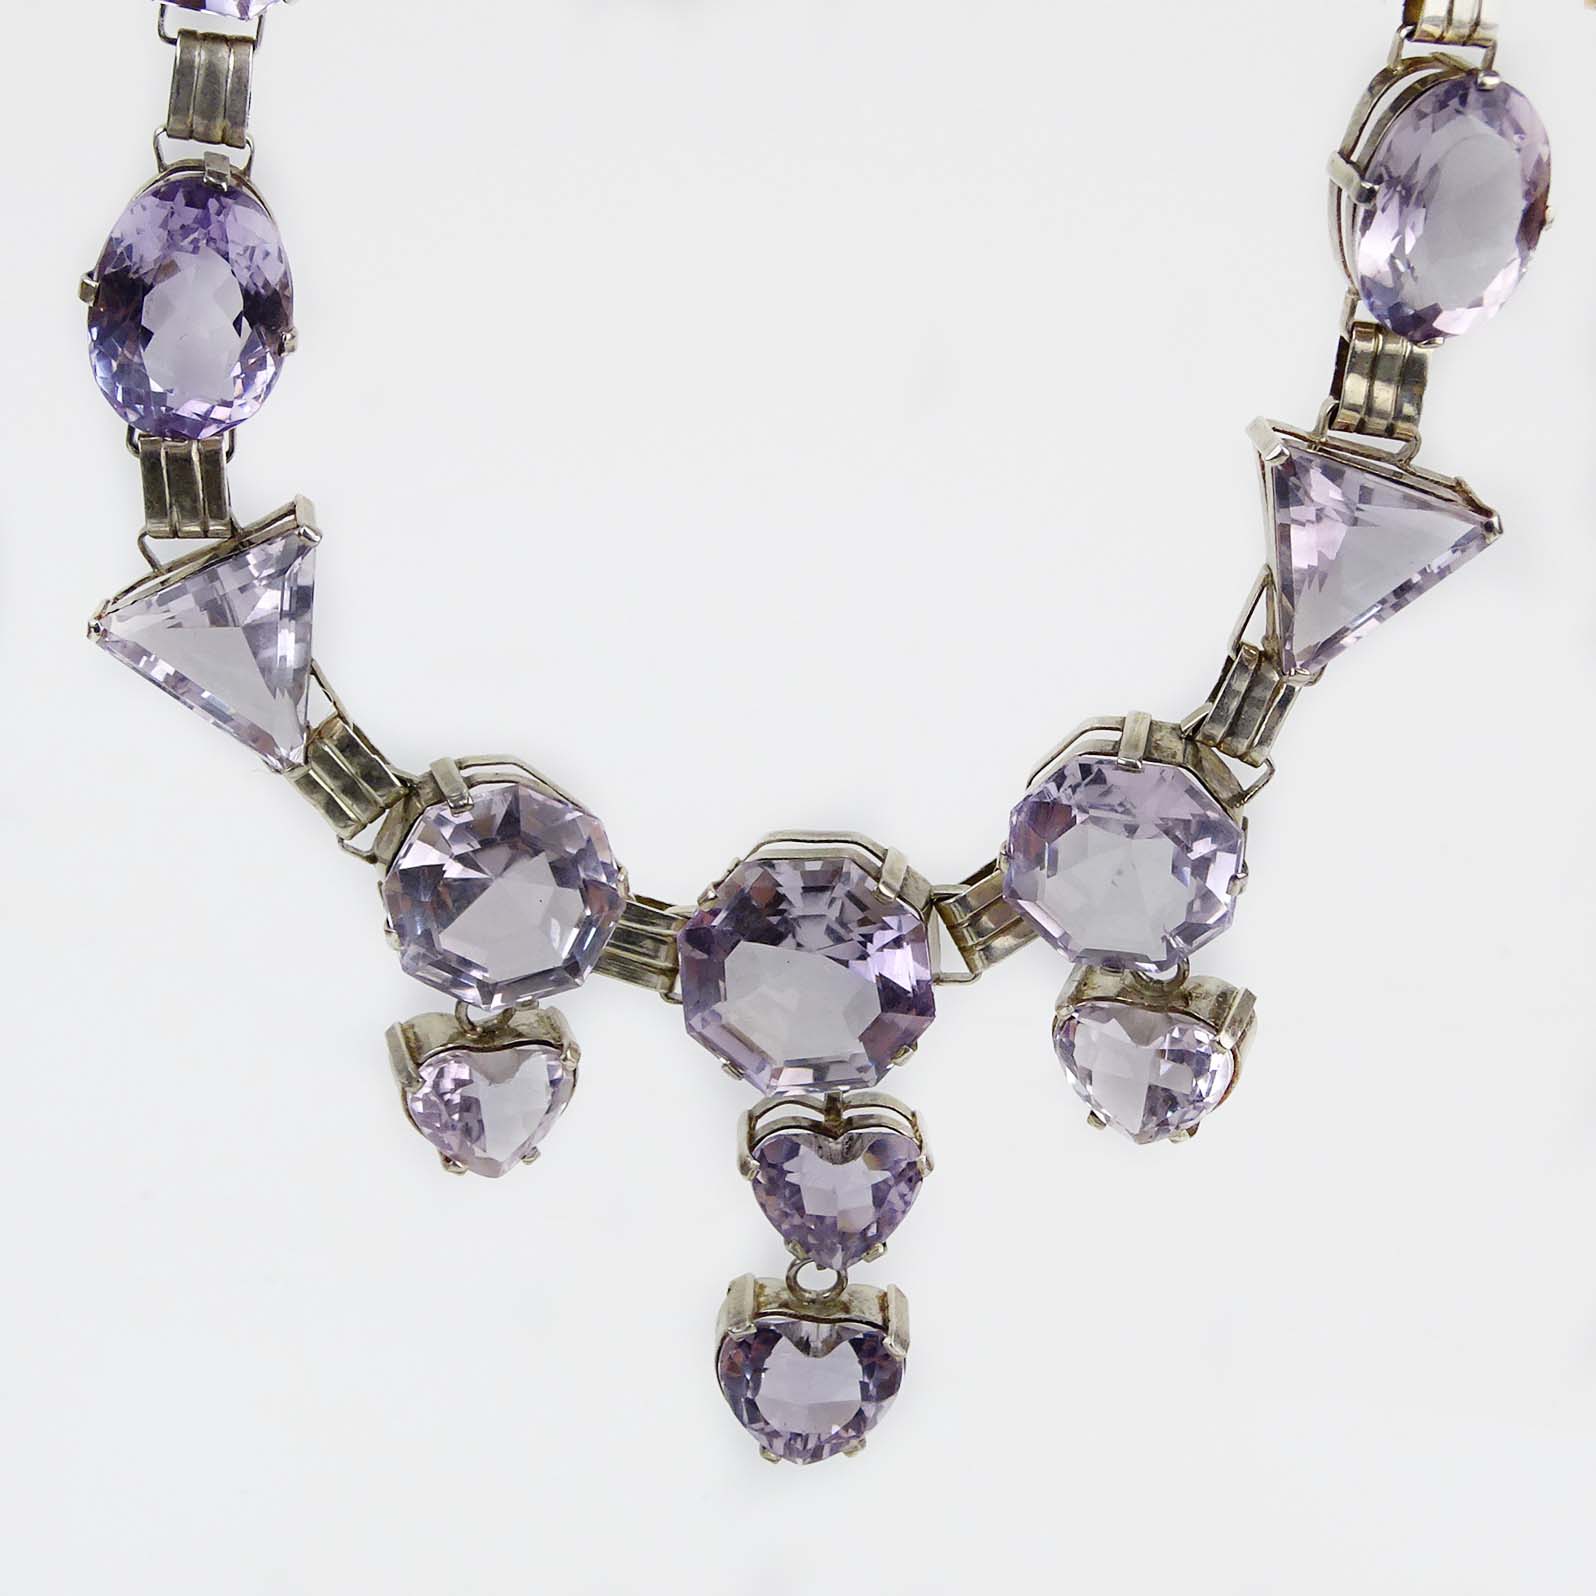 Vintage Purple Stone and Sterling Silver Necklace.